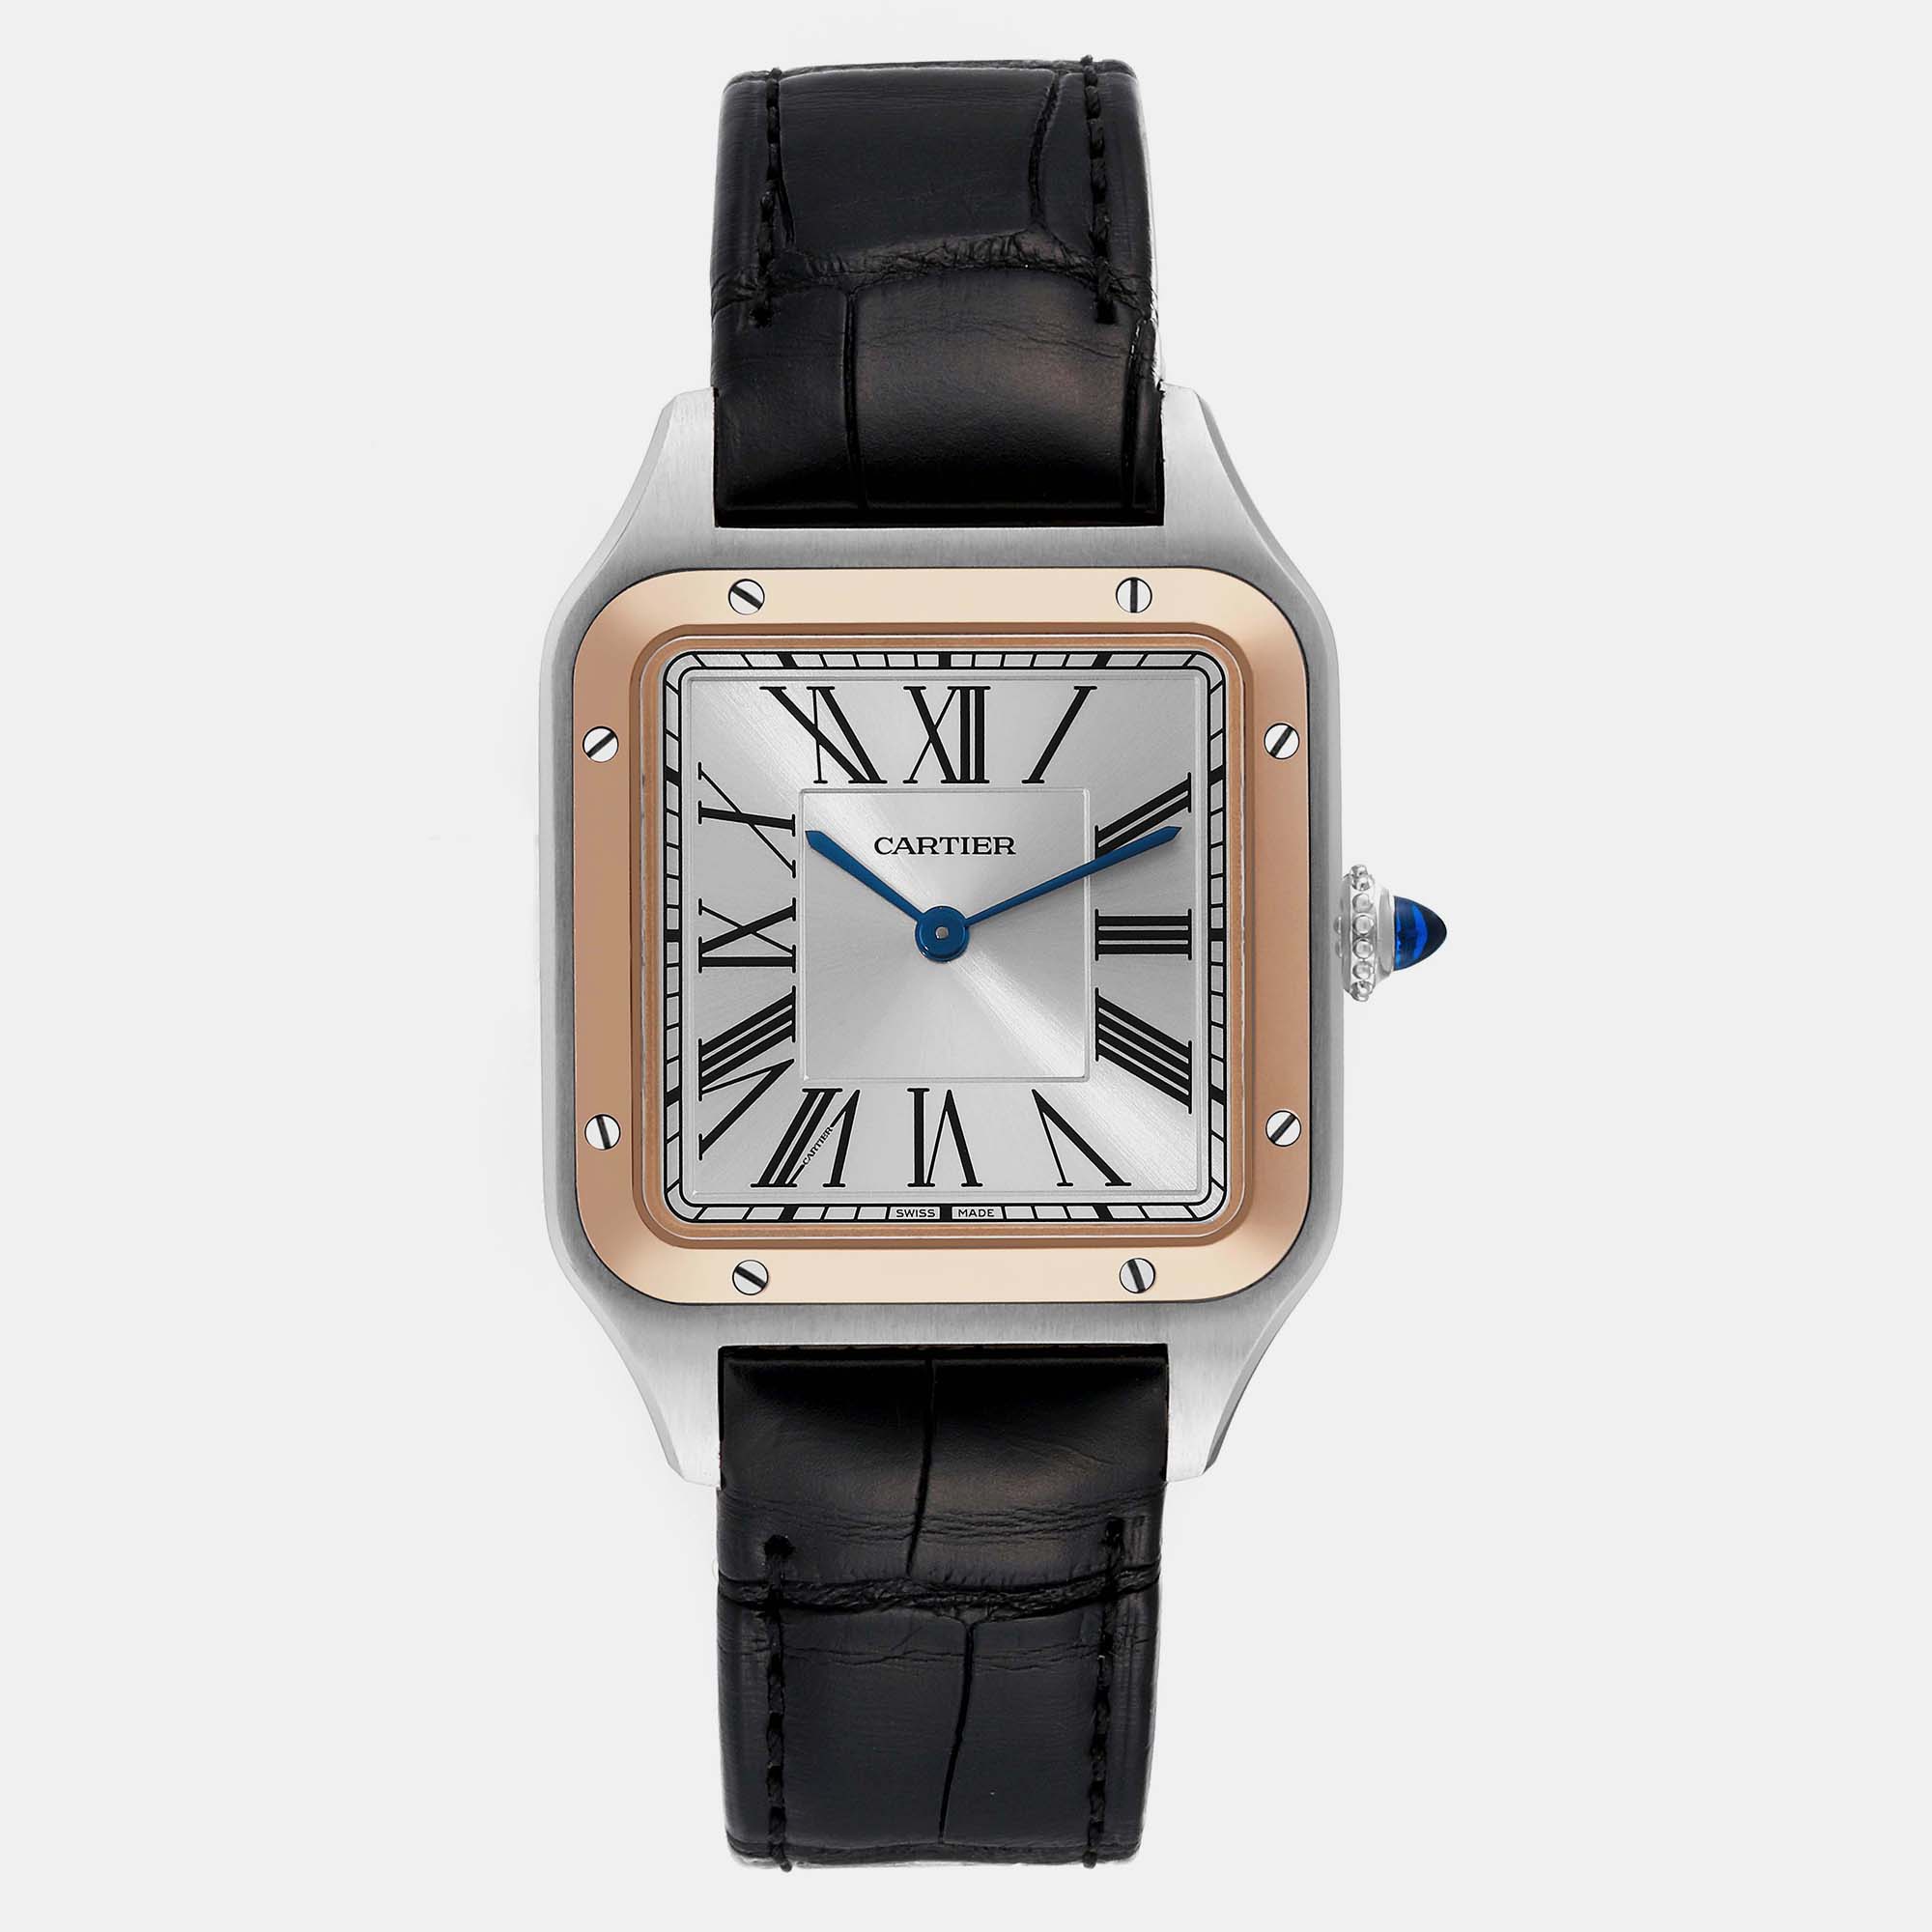 Pre-owned Cartier Santos Dumont Large Steel Rose Gold Mens Watch W2sa0011 43.5 Mm X 31.4 Mm In Silver